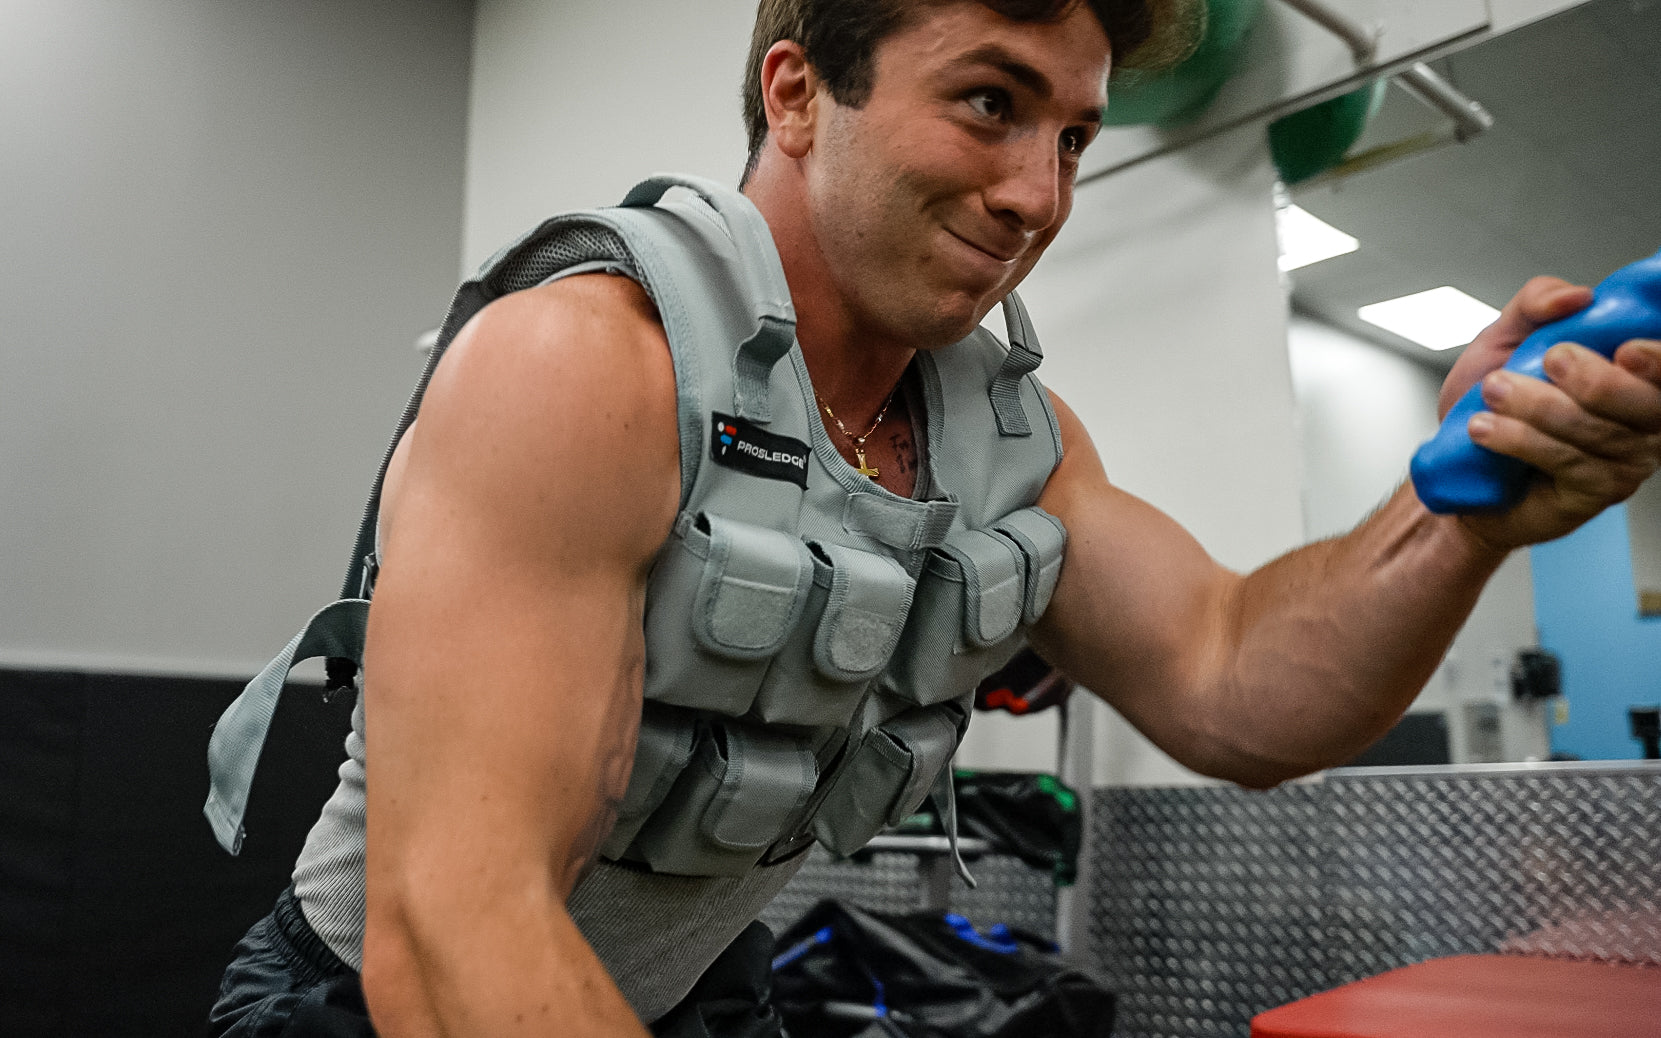 How you can get creative with the new ProSledge weighted vest